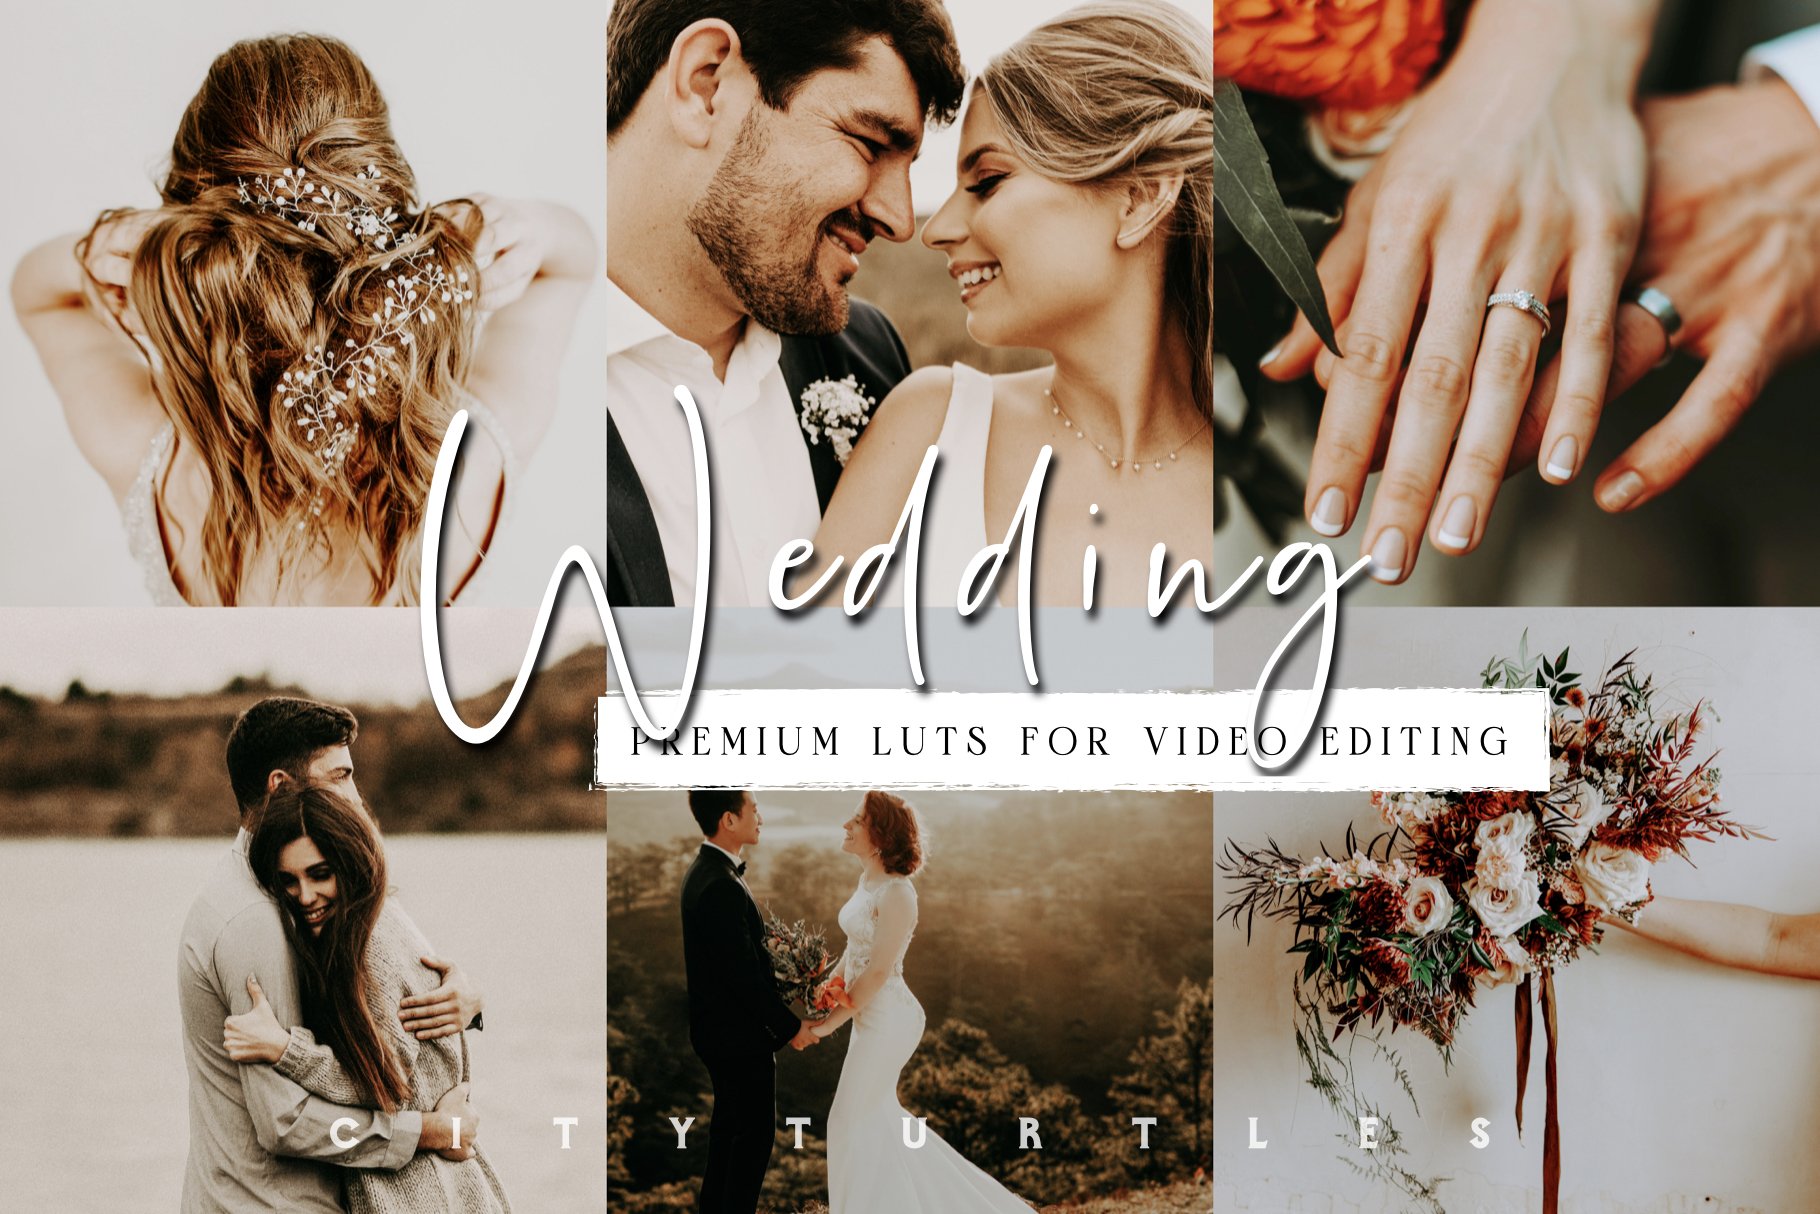 Moody Wedding LUTs for Video Editingcover image.